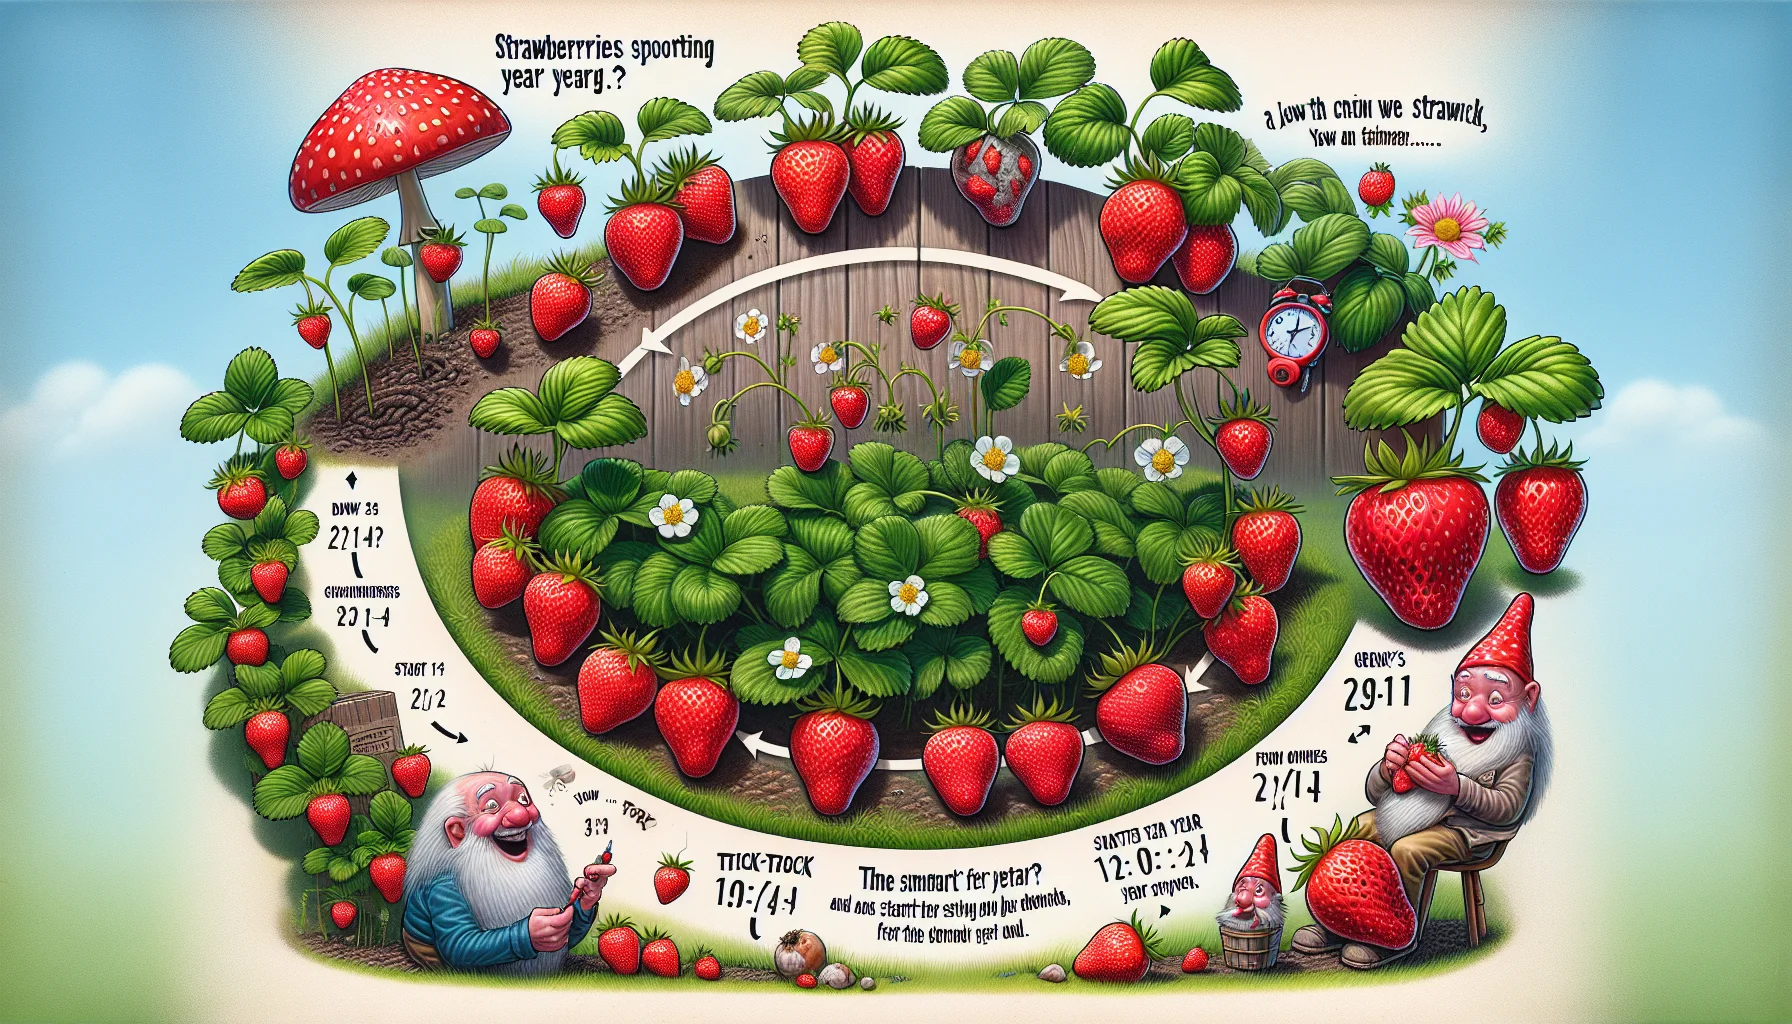 Create a humorous and realistic image that showcases the life cycle of strawberries, returning year after year. In the scene, depict a garden filled with lush, ripe strawberries. There should be a 'tick-tock' style time progression panel illustrating strawberries sprouting, growing, bearing fruit, and starting again the next year. Add whimsical elements like elderberries chuckling at a new strawberry sprouting, or a garden gnome looking surprised when strawberries reappear each year. The aim is to encourage appreciation for gardening and the joys of seasonal produce